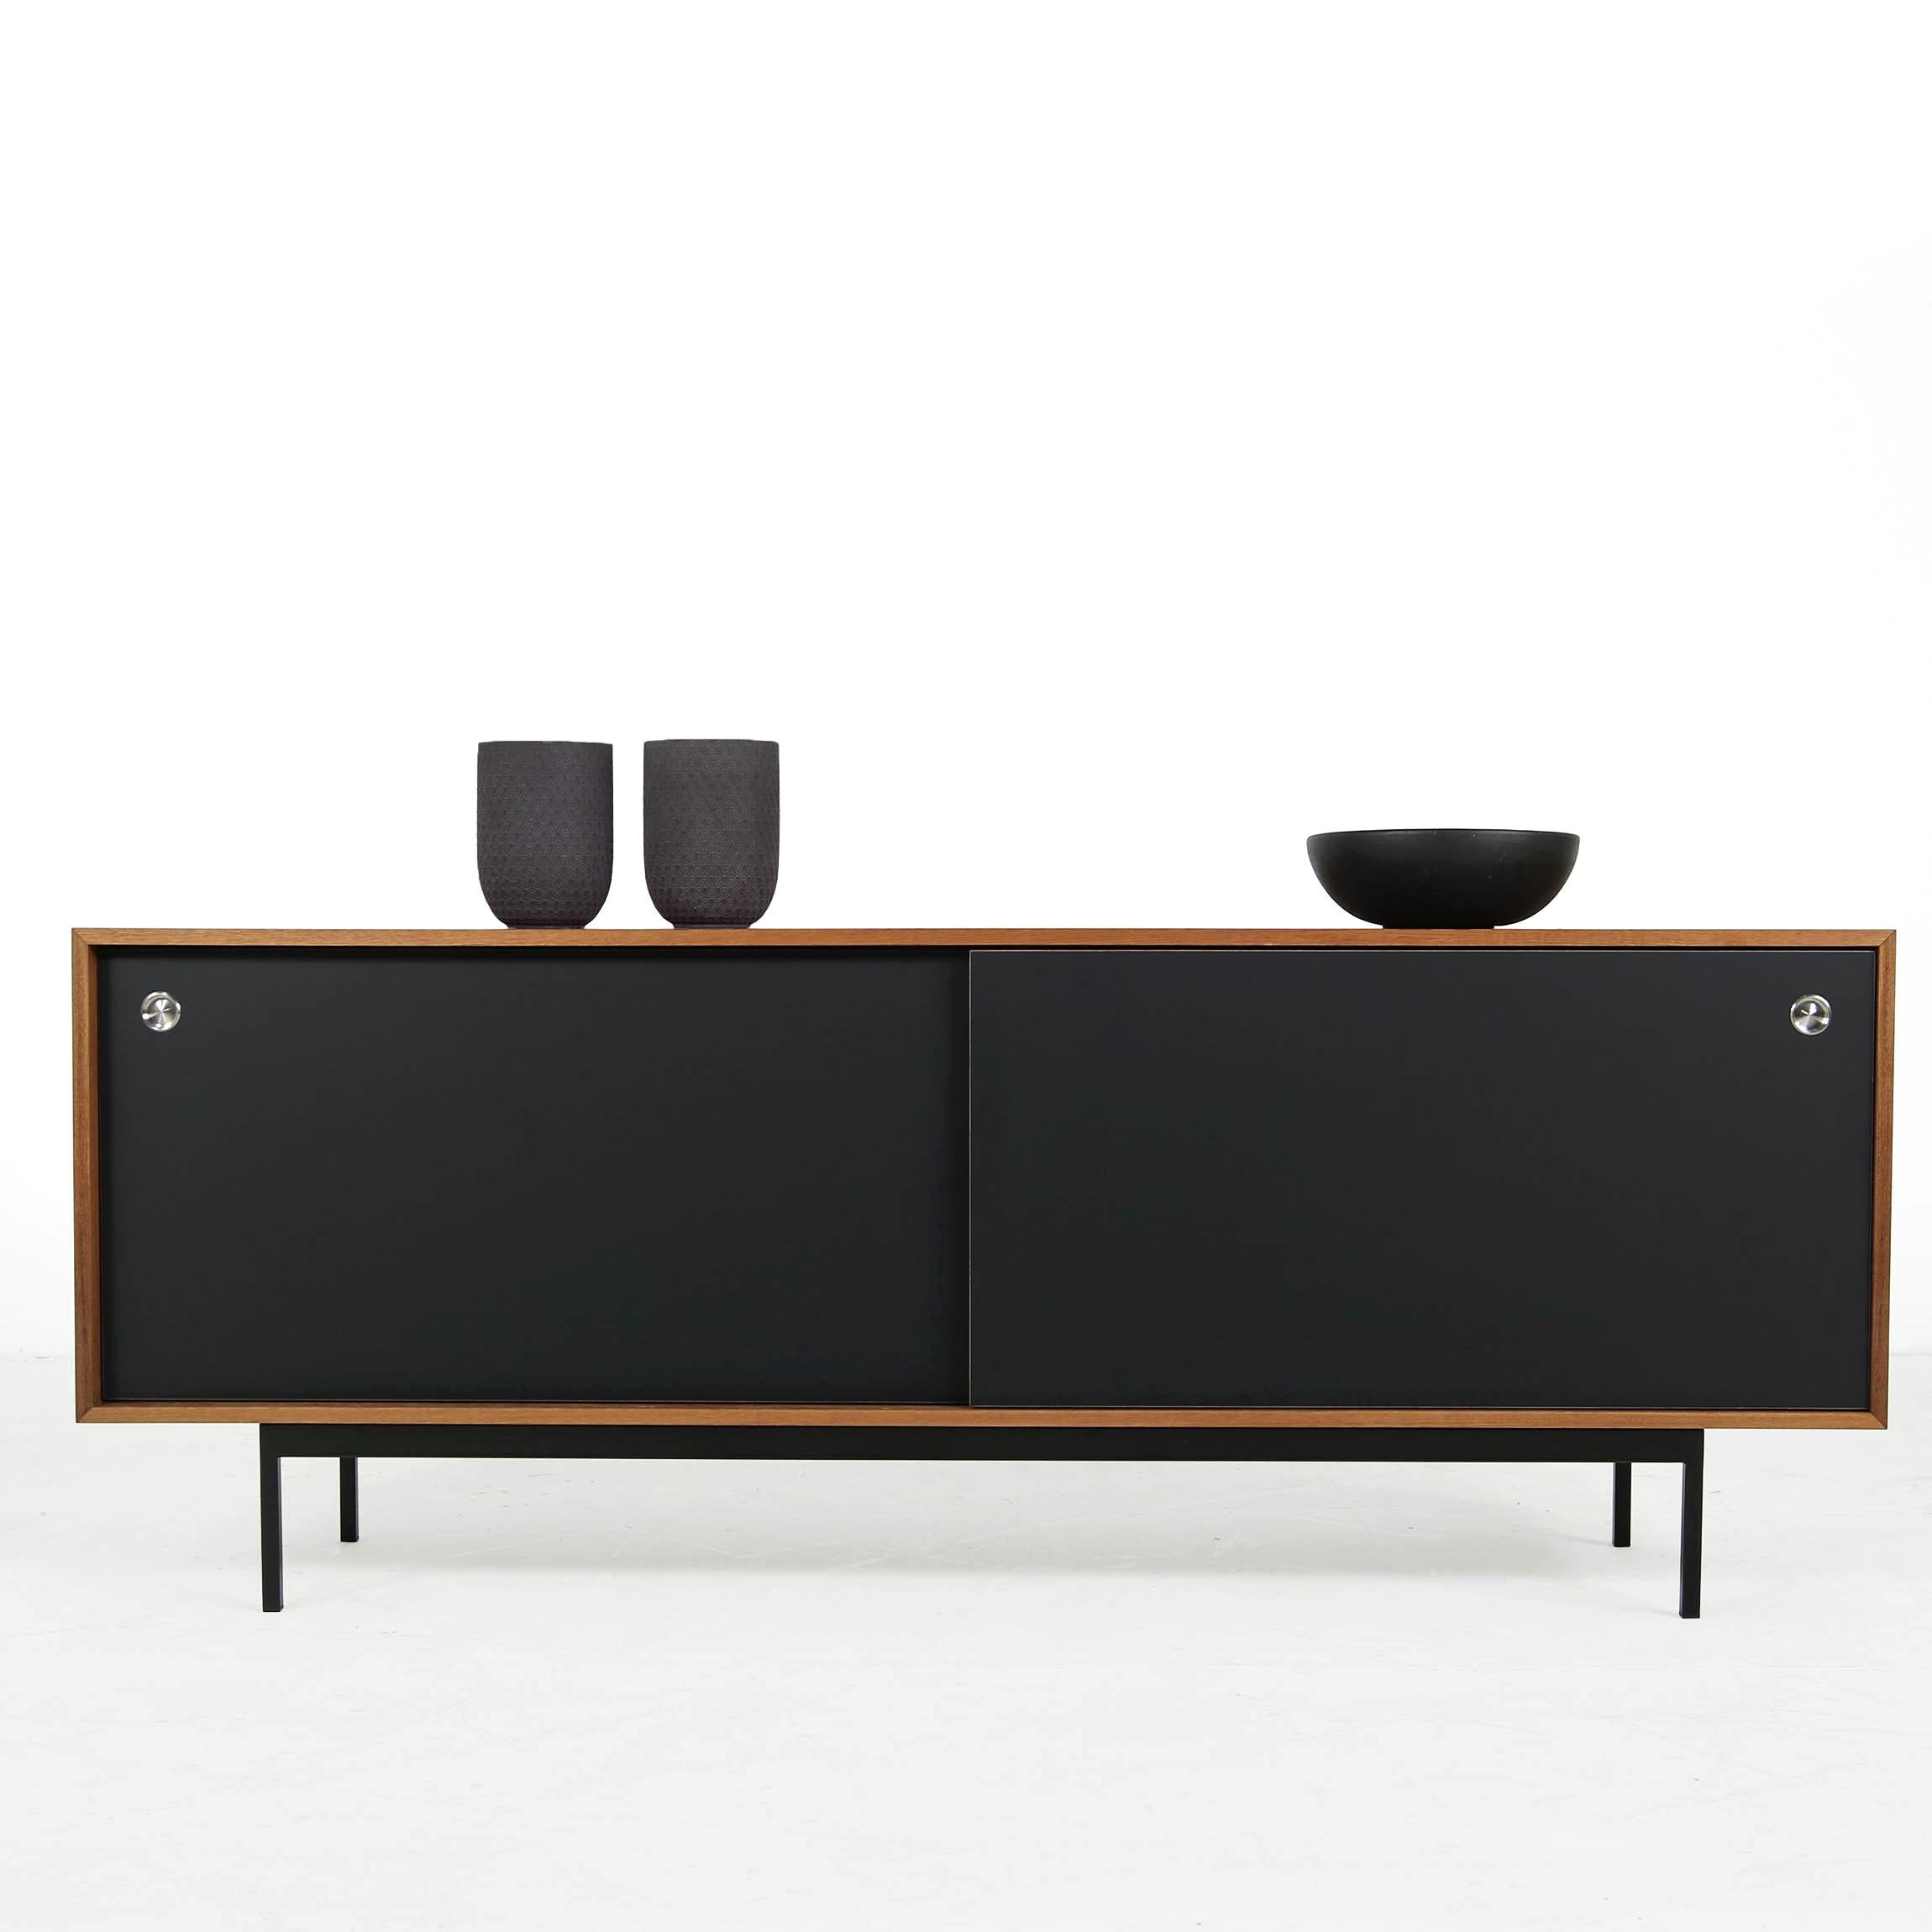 Beautiful teak sideboard, freestanding, made in Germany, design by Nathan Lindberg (Nathan Lindberg Design)
Black HPL (Formica) sliding doors with stainless steel door handles, iron base powder coated in black.
Best condition, the sideboard was